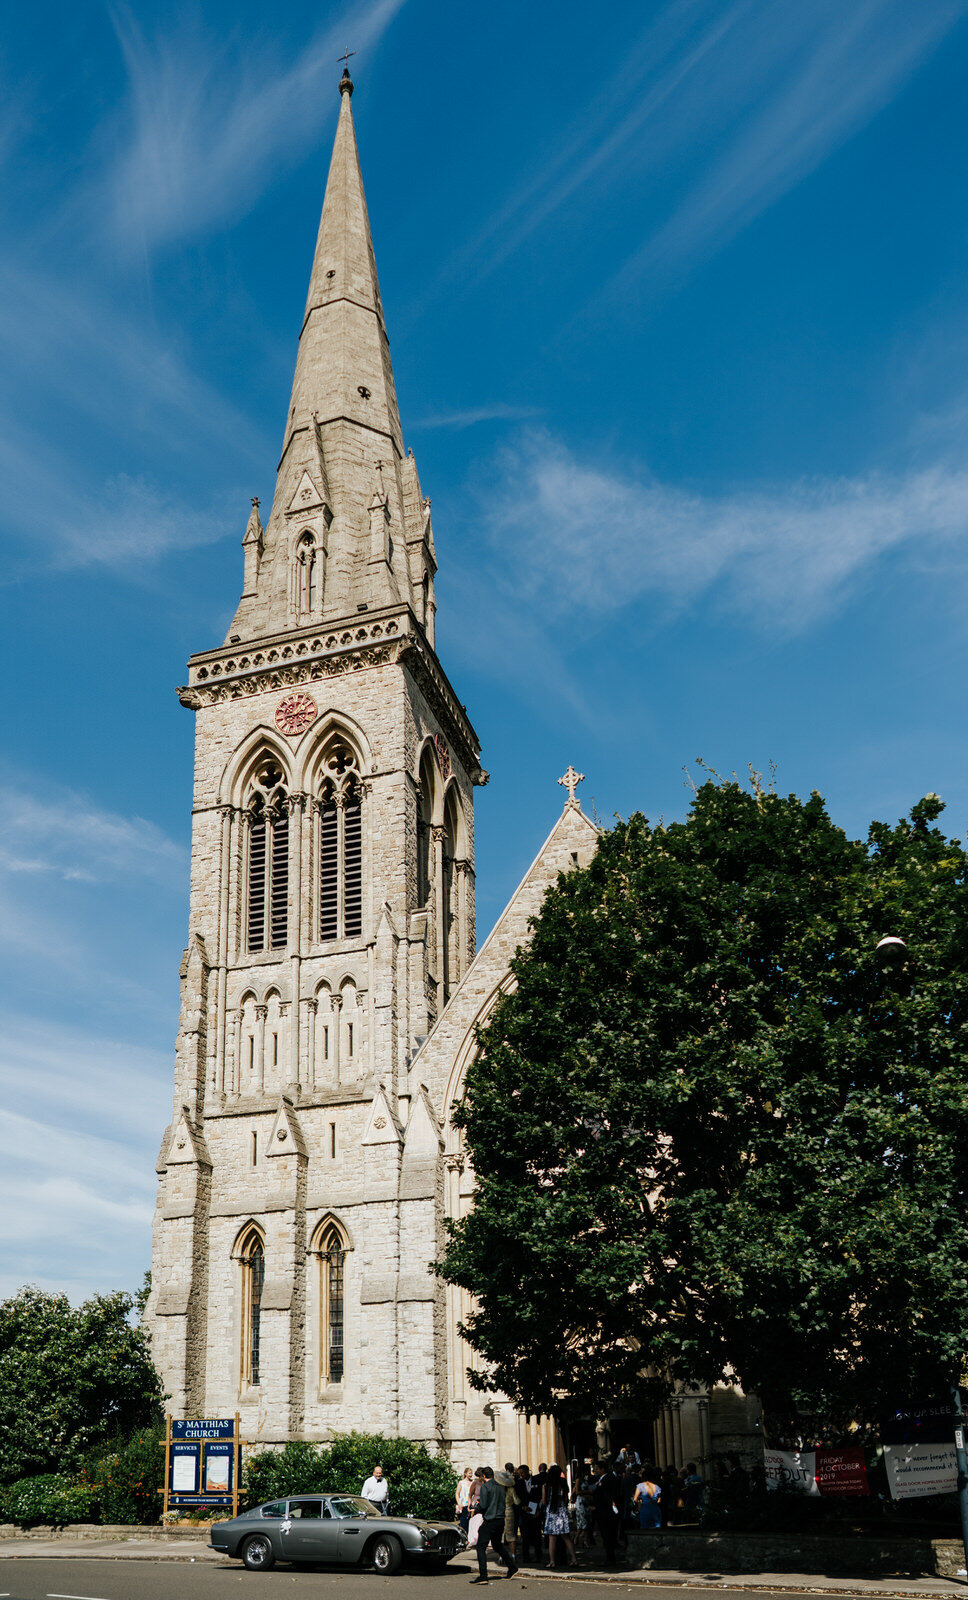 Wide photograph of the exterior of St Matthias Church in Richmond showing beautiful spire and vintage wedding car